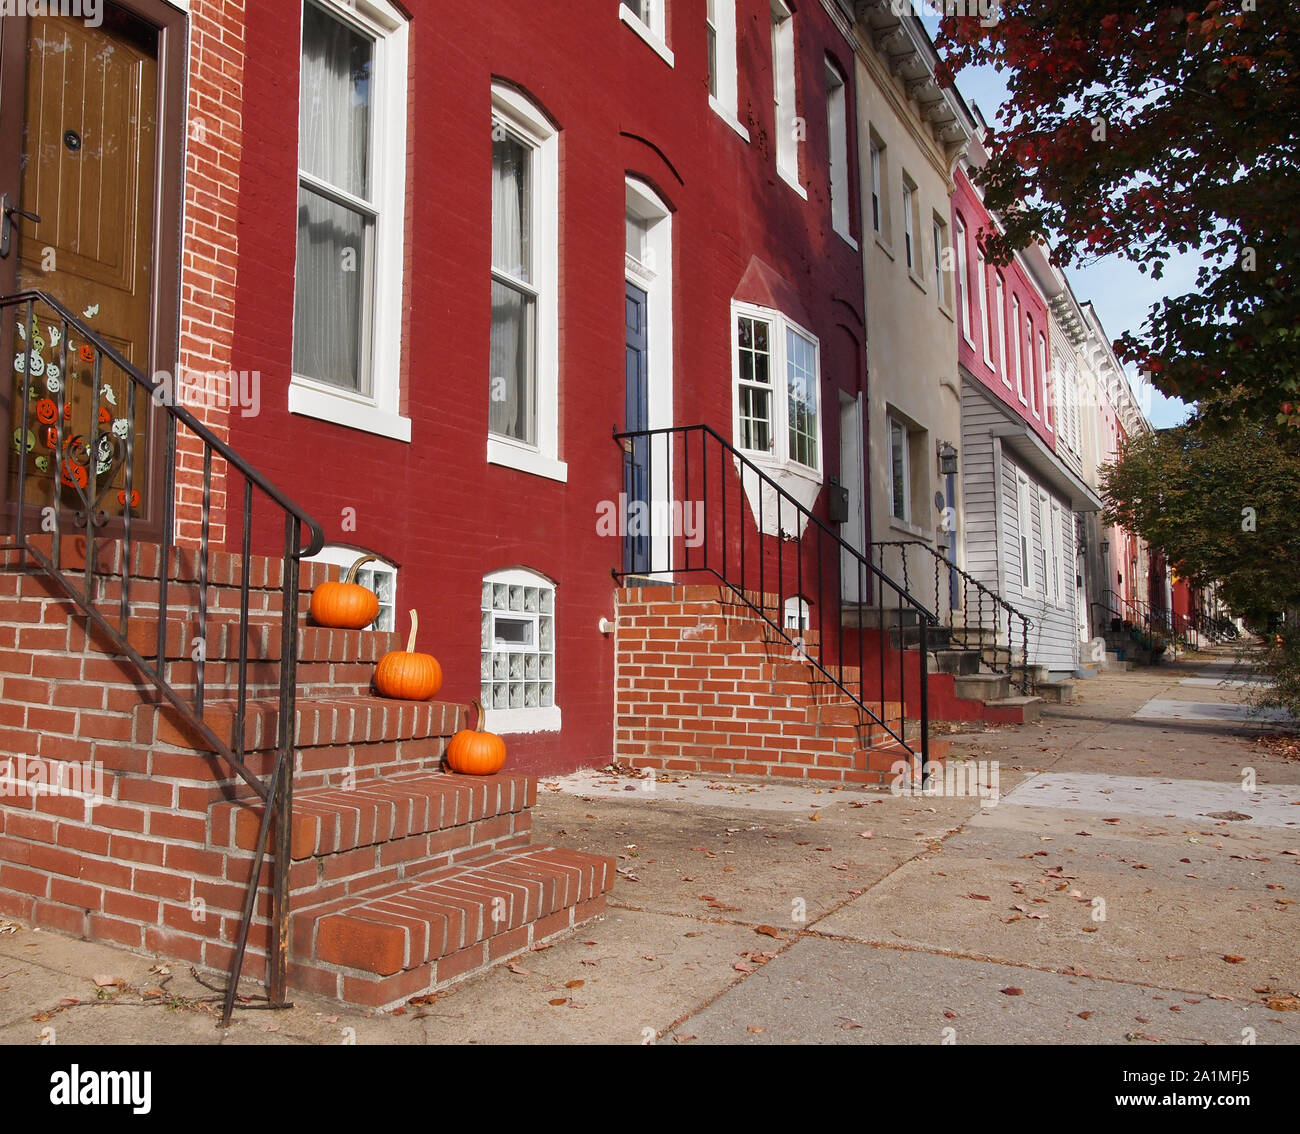 Three perfect orange pumpkins decorate the steps of a brick stoop style doorstep in an urban rowhouse neighborhood in the autumn season. Stock Photo